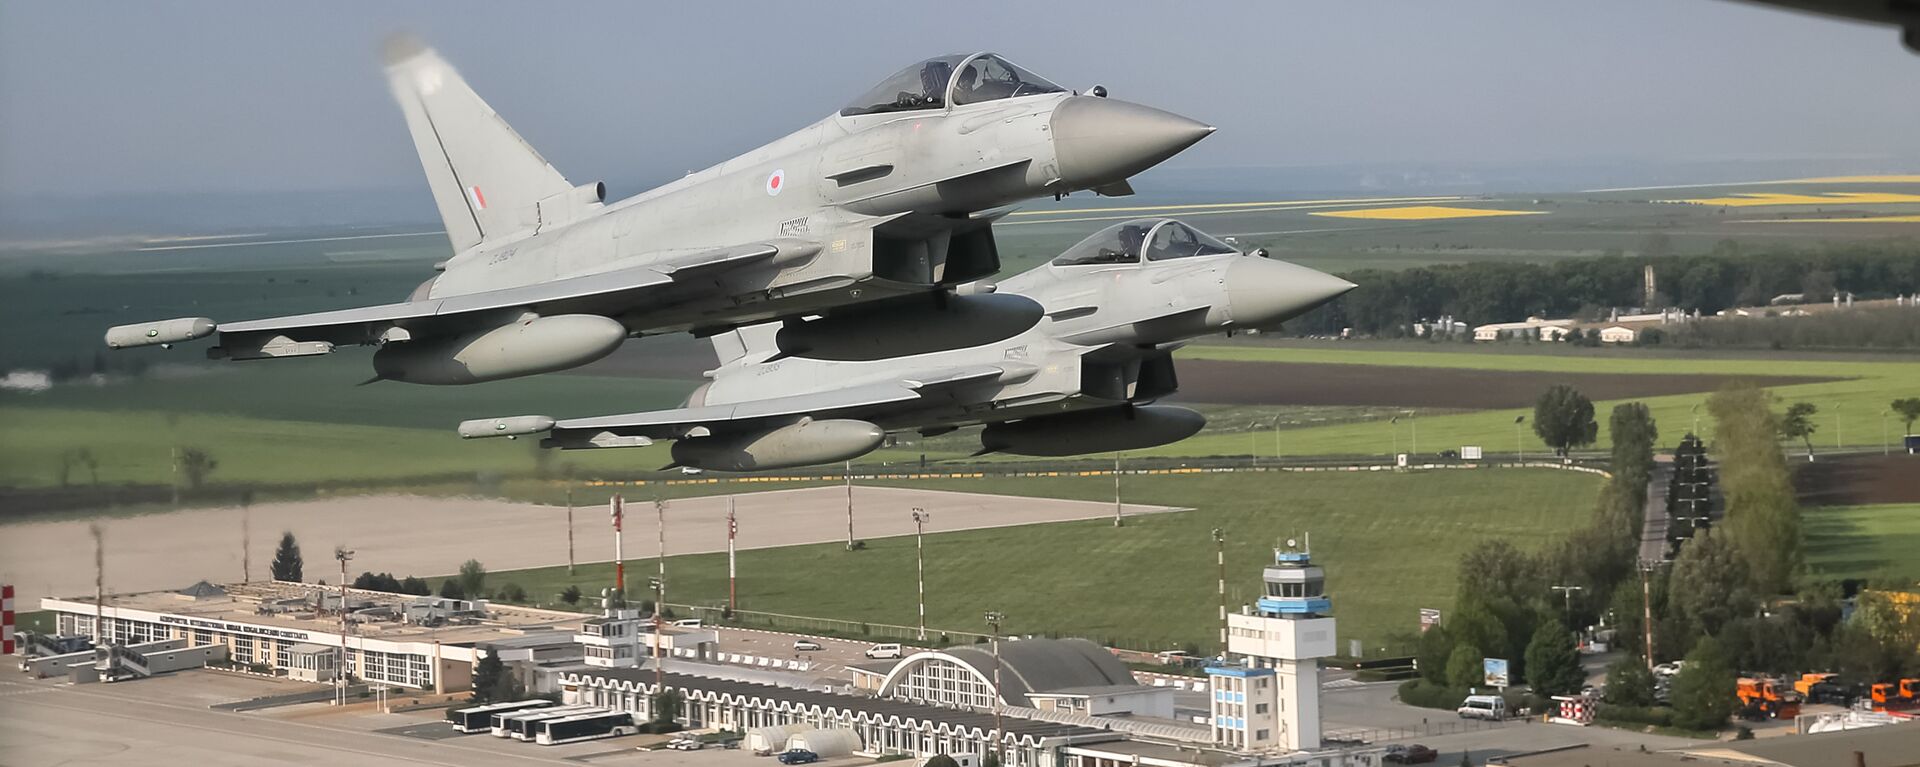 (File) Royal Air Force Eurofighter Typhoon fighter jets fly above the Mihail Kogalniceanu airport, eastern Romania, Friday, April 27, 2018 - Sputnik International, 1920, 18.02.2023